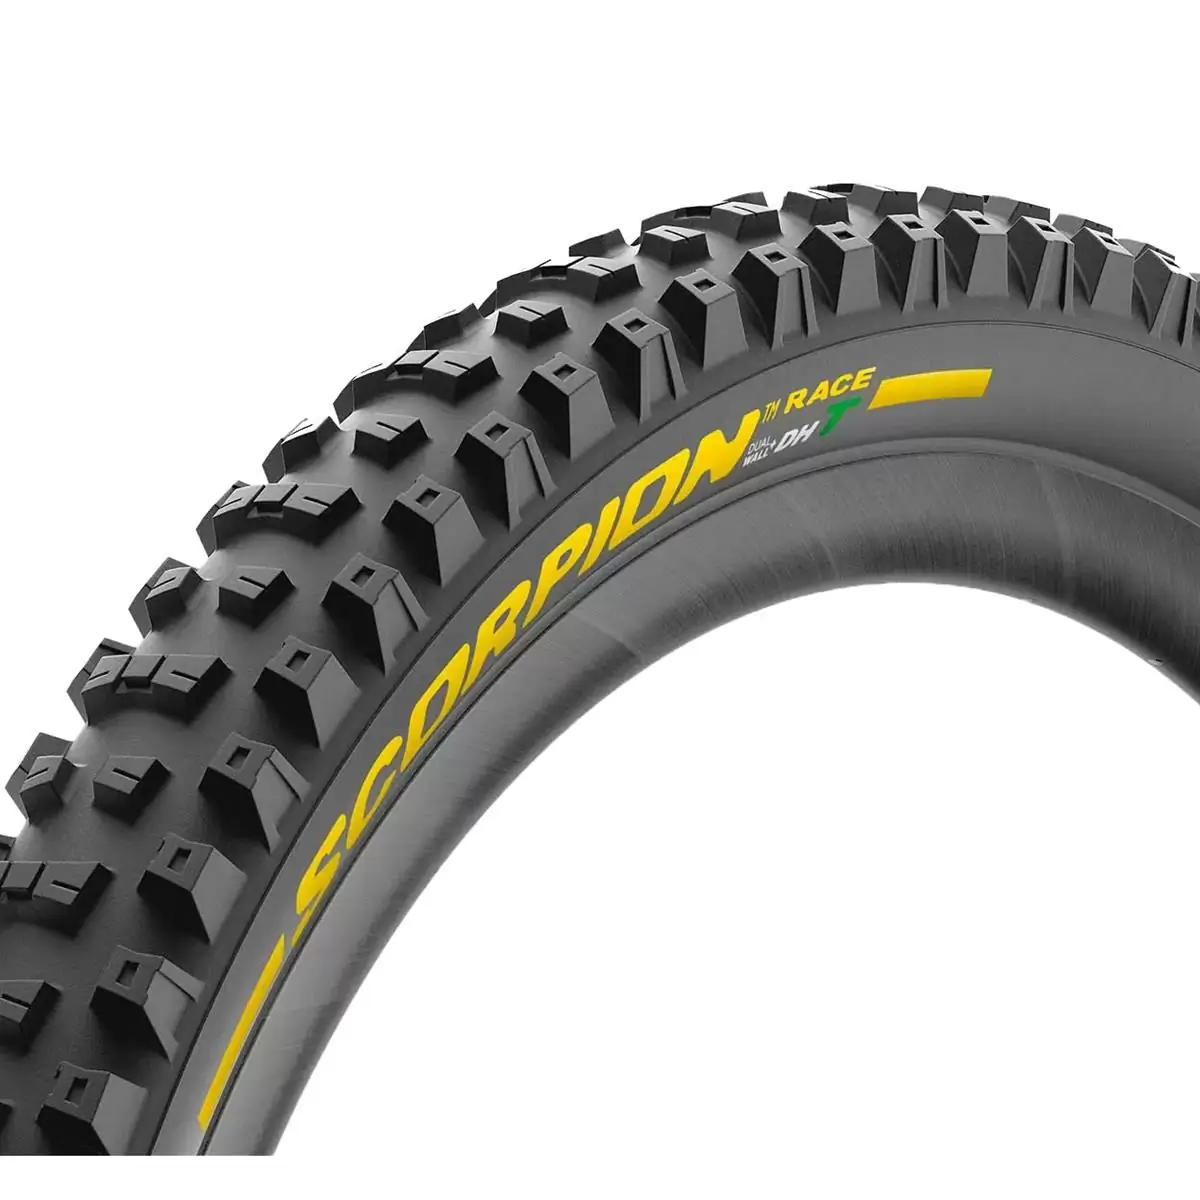 Tire Scorpion Race DH T 29x2.50'' DualWall+ SmartEVO DH - image